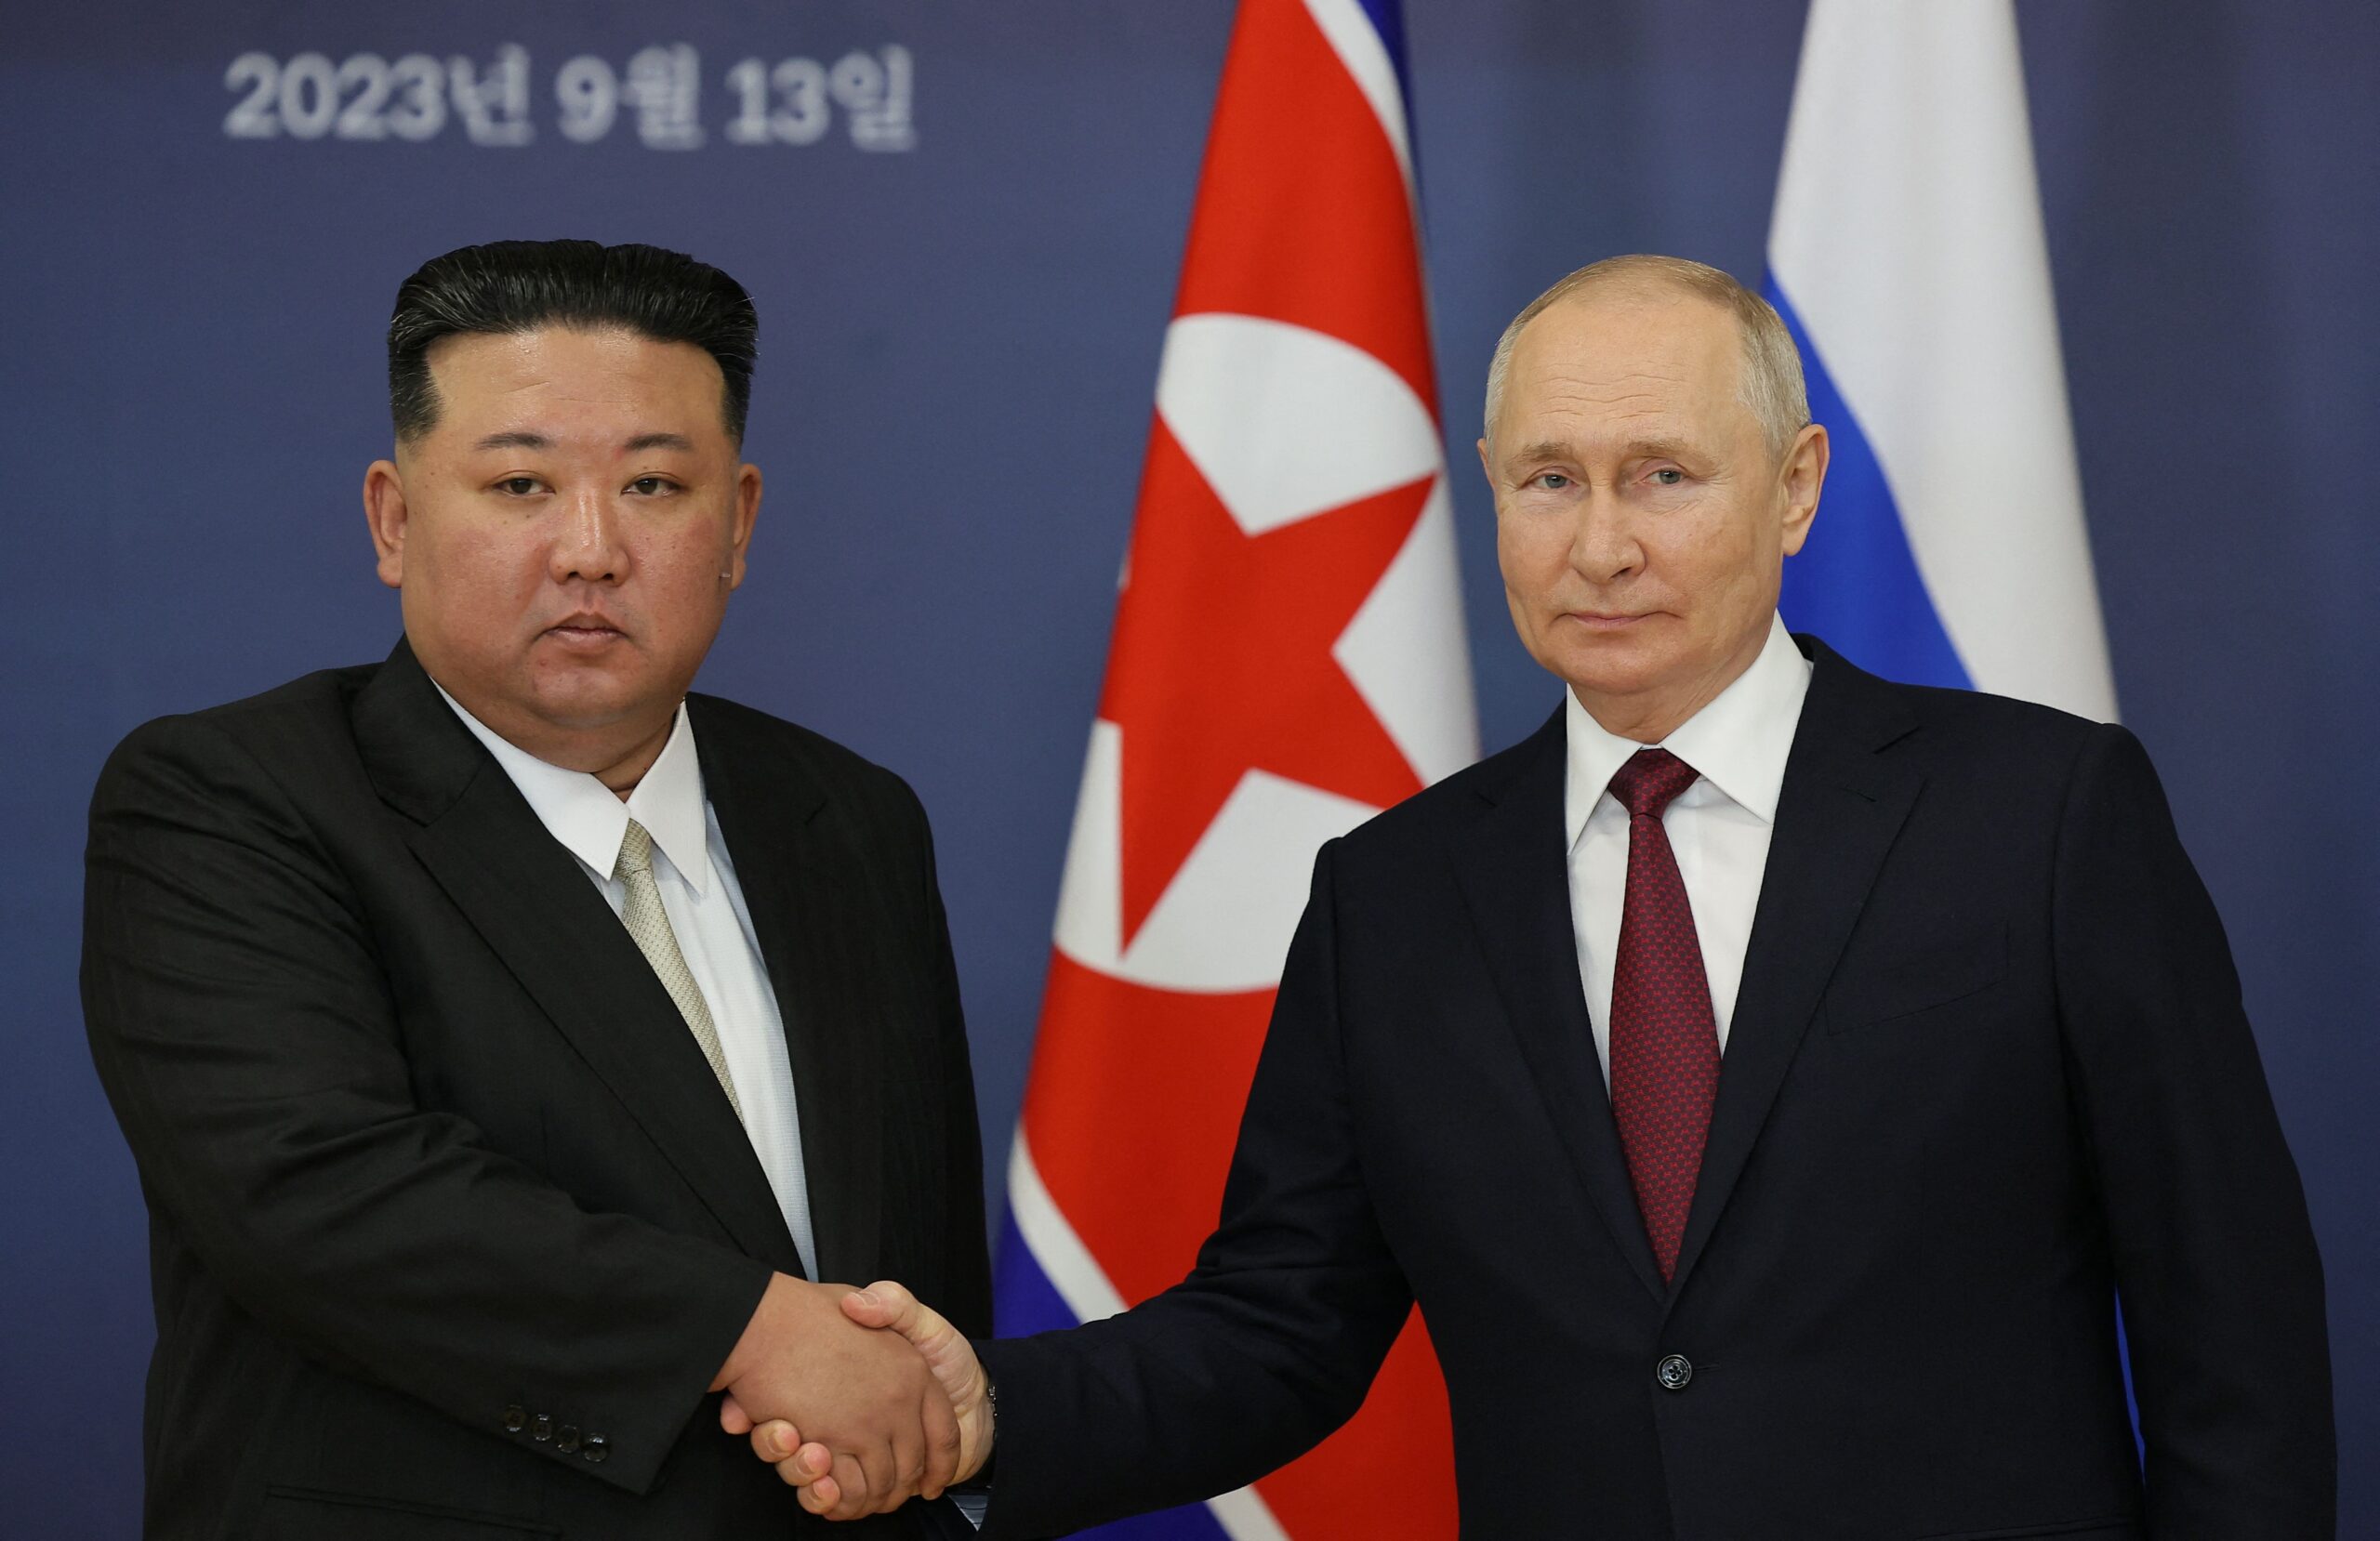 Kim Jong Un and Putin discuss military cooperation, space tech, and Ukraine war at summit.